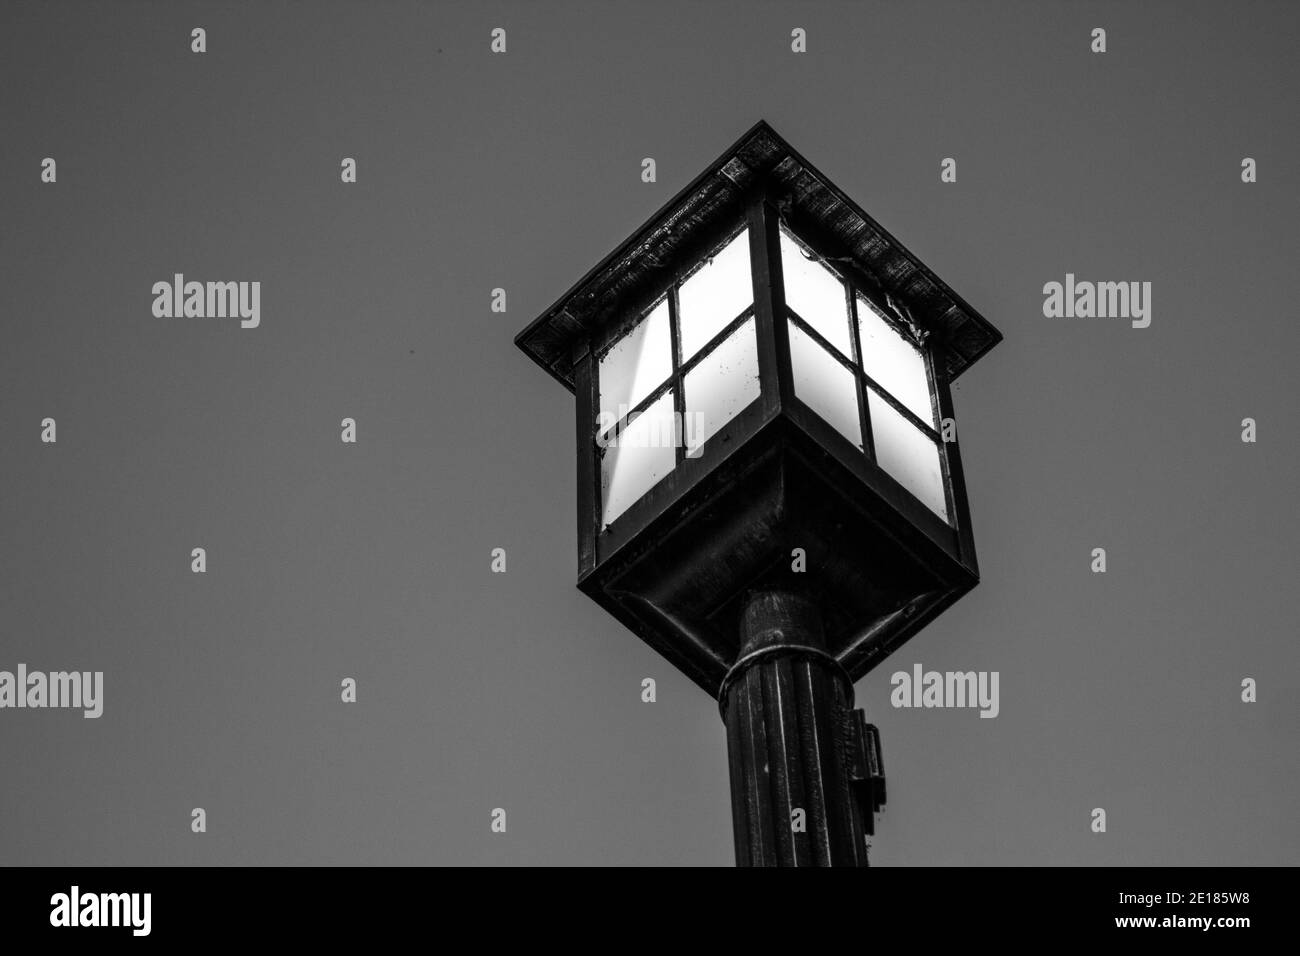 Old fashioned lamp post illuminated against the night sky. Black and white in horizontal orientation with copy space. Stock Photo